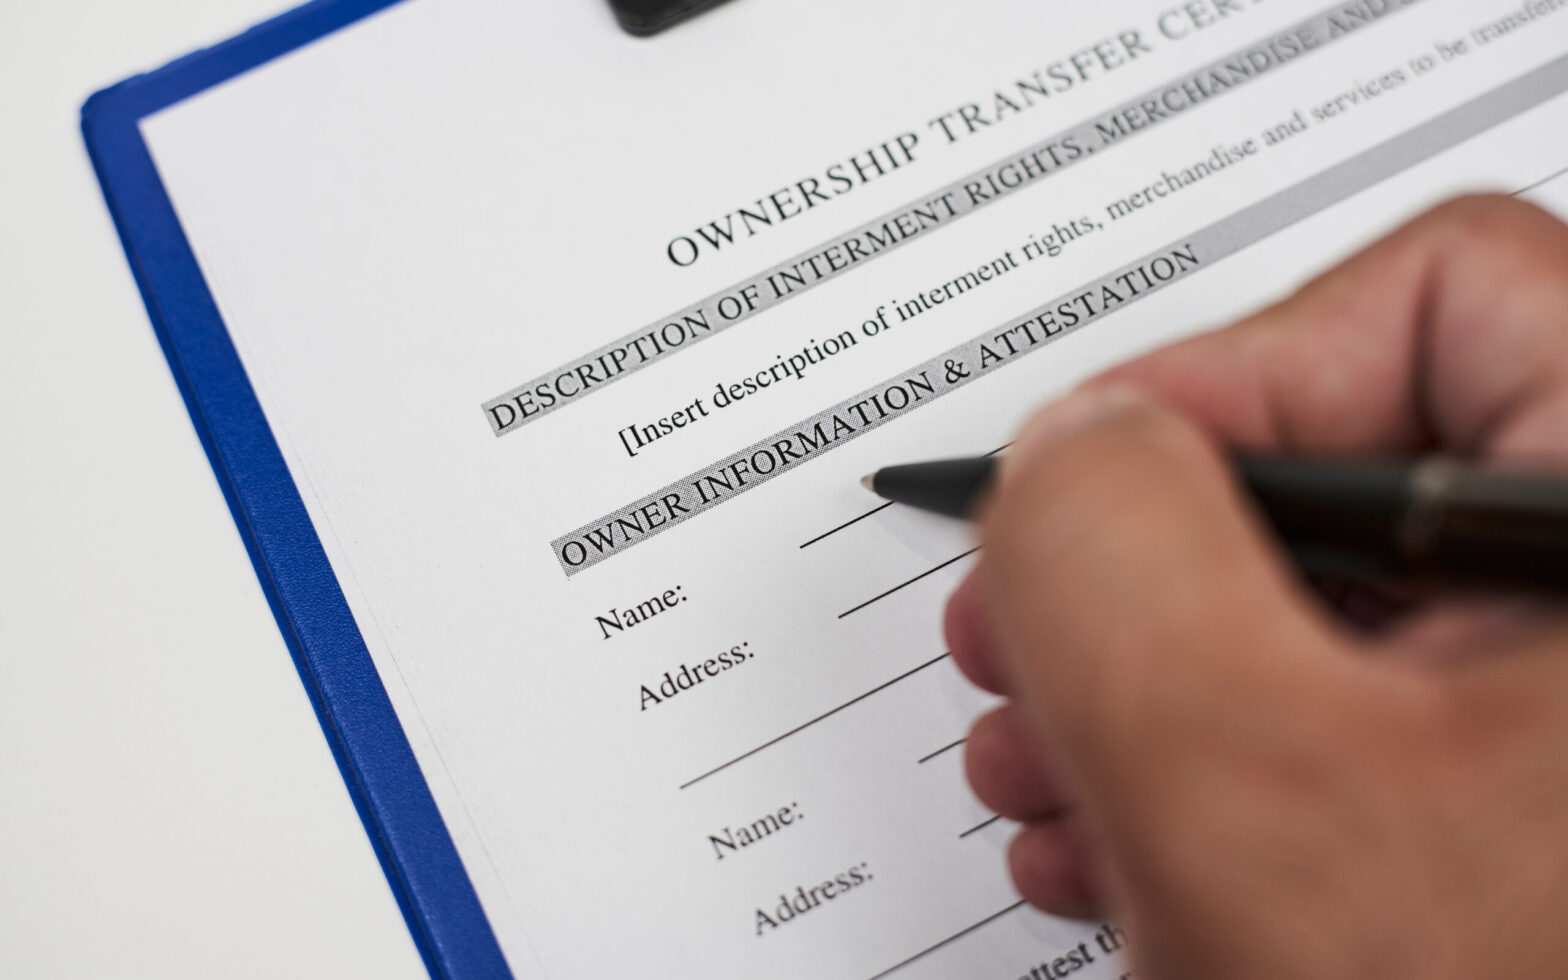 How to fill vehicle ownership transfer application